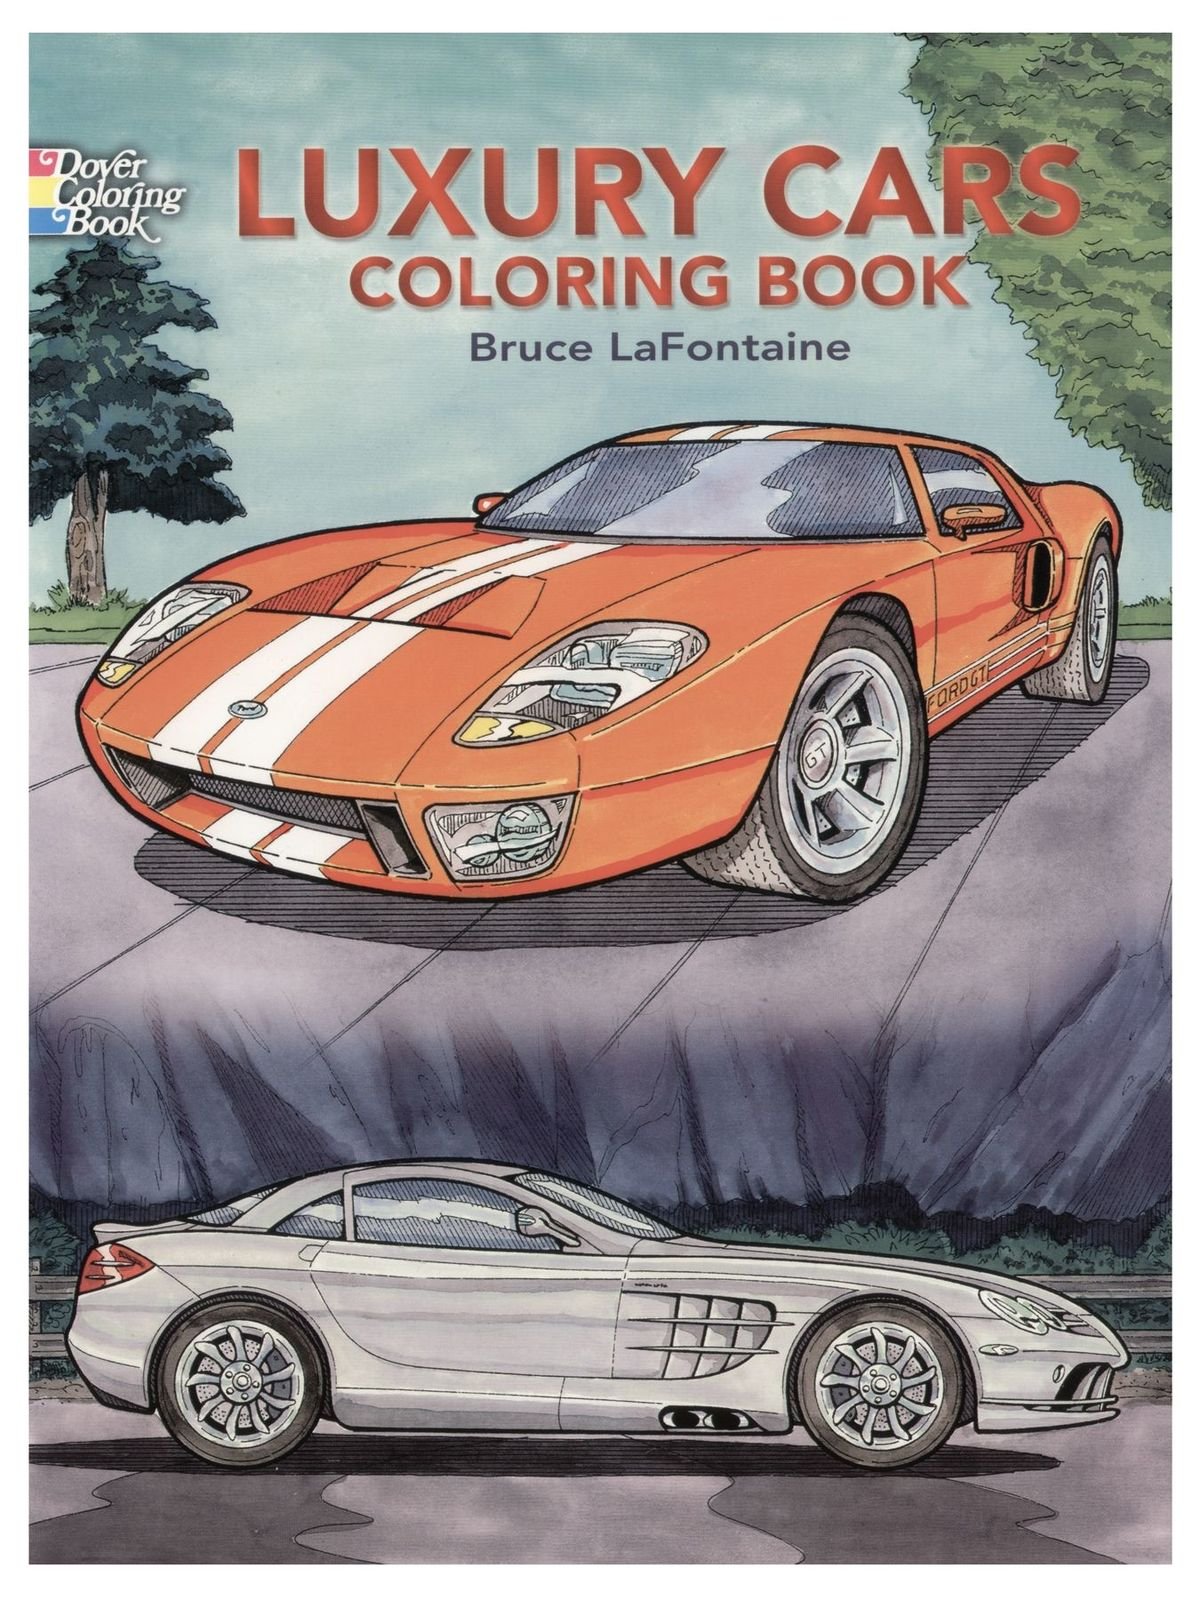 Dover - Luxury Cars Coloring Book